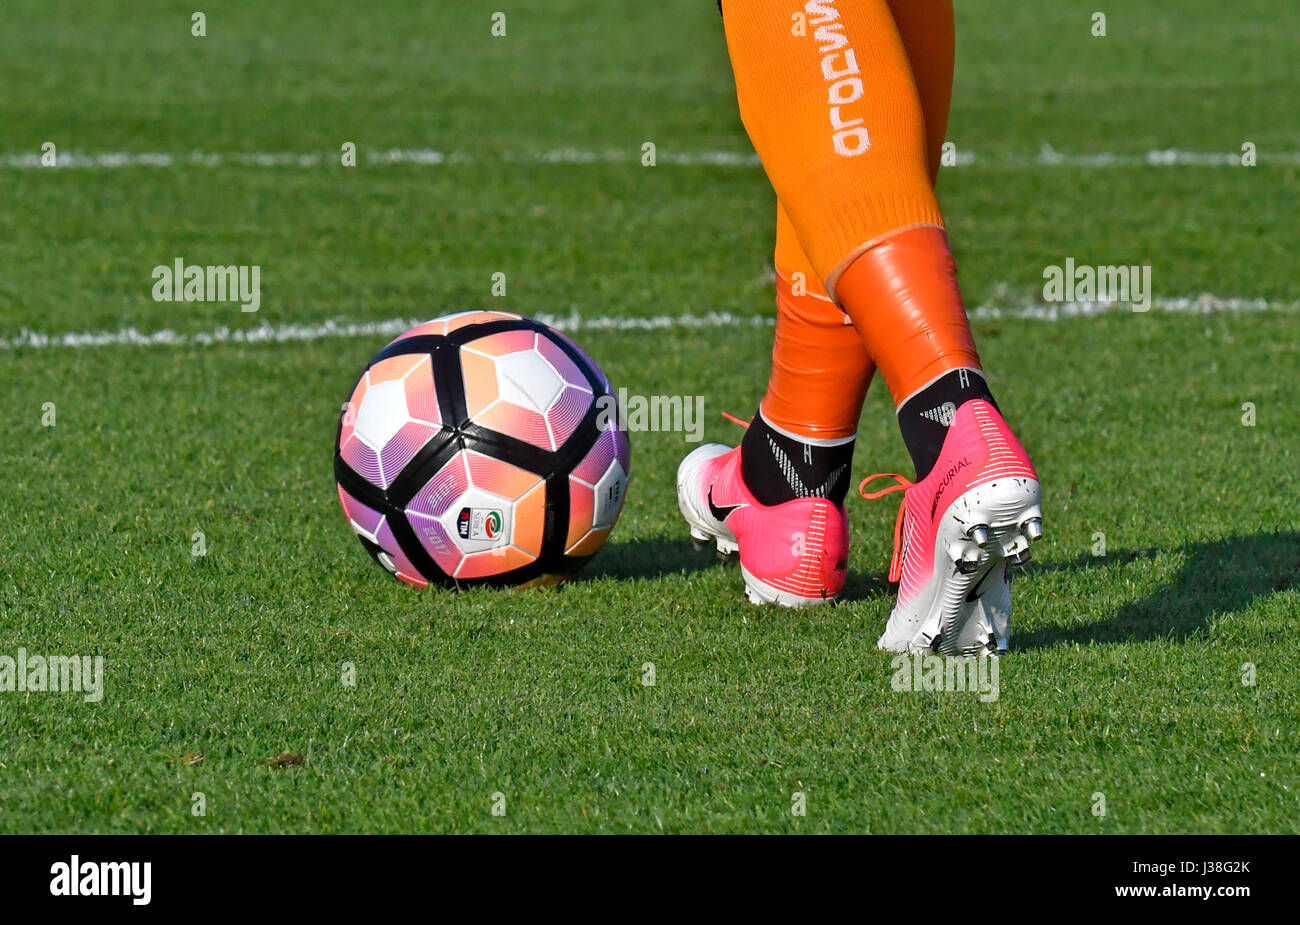 soccer player's close up legs, kicking the ball on the pitch grass. Stock Photo